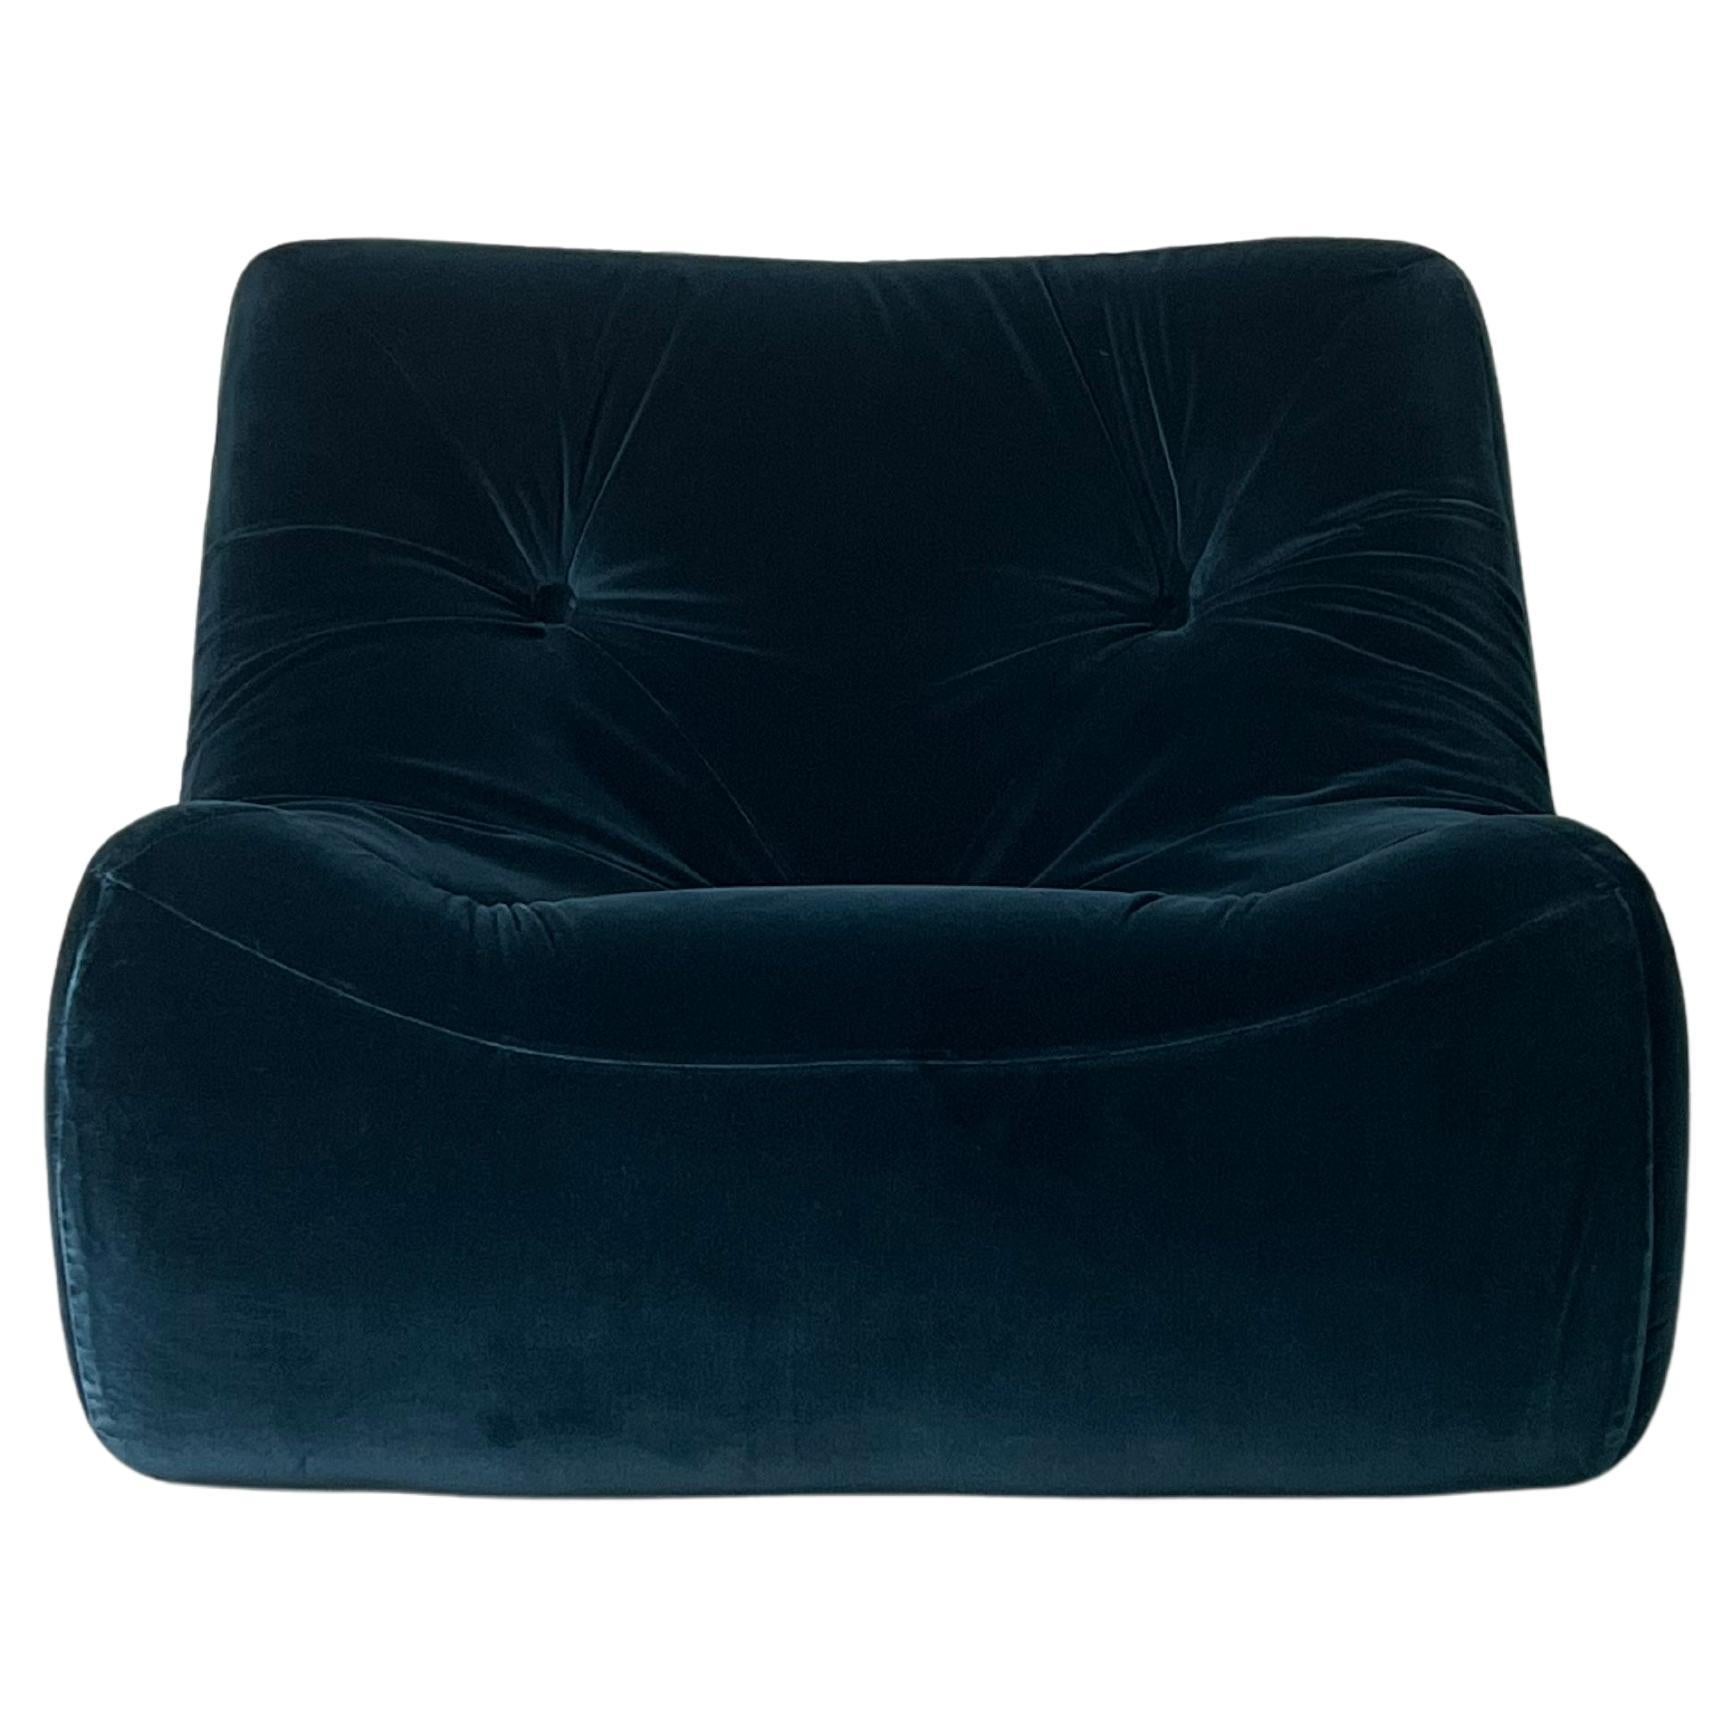 Kali armchair by Michel Ducaroy for Roset Line 1970s For Sale